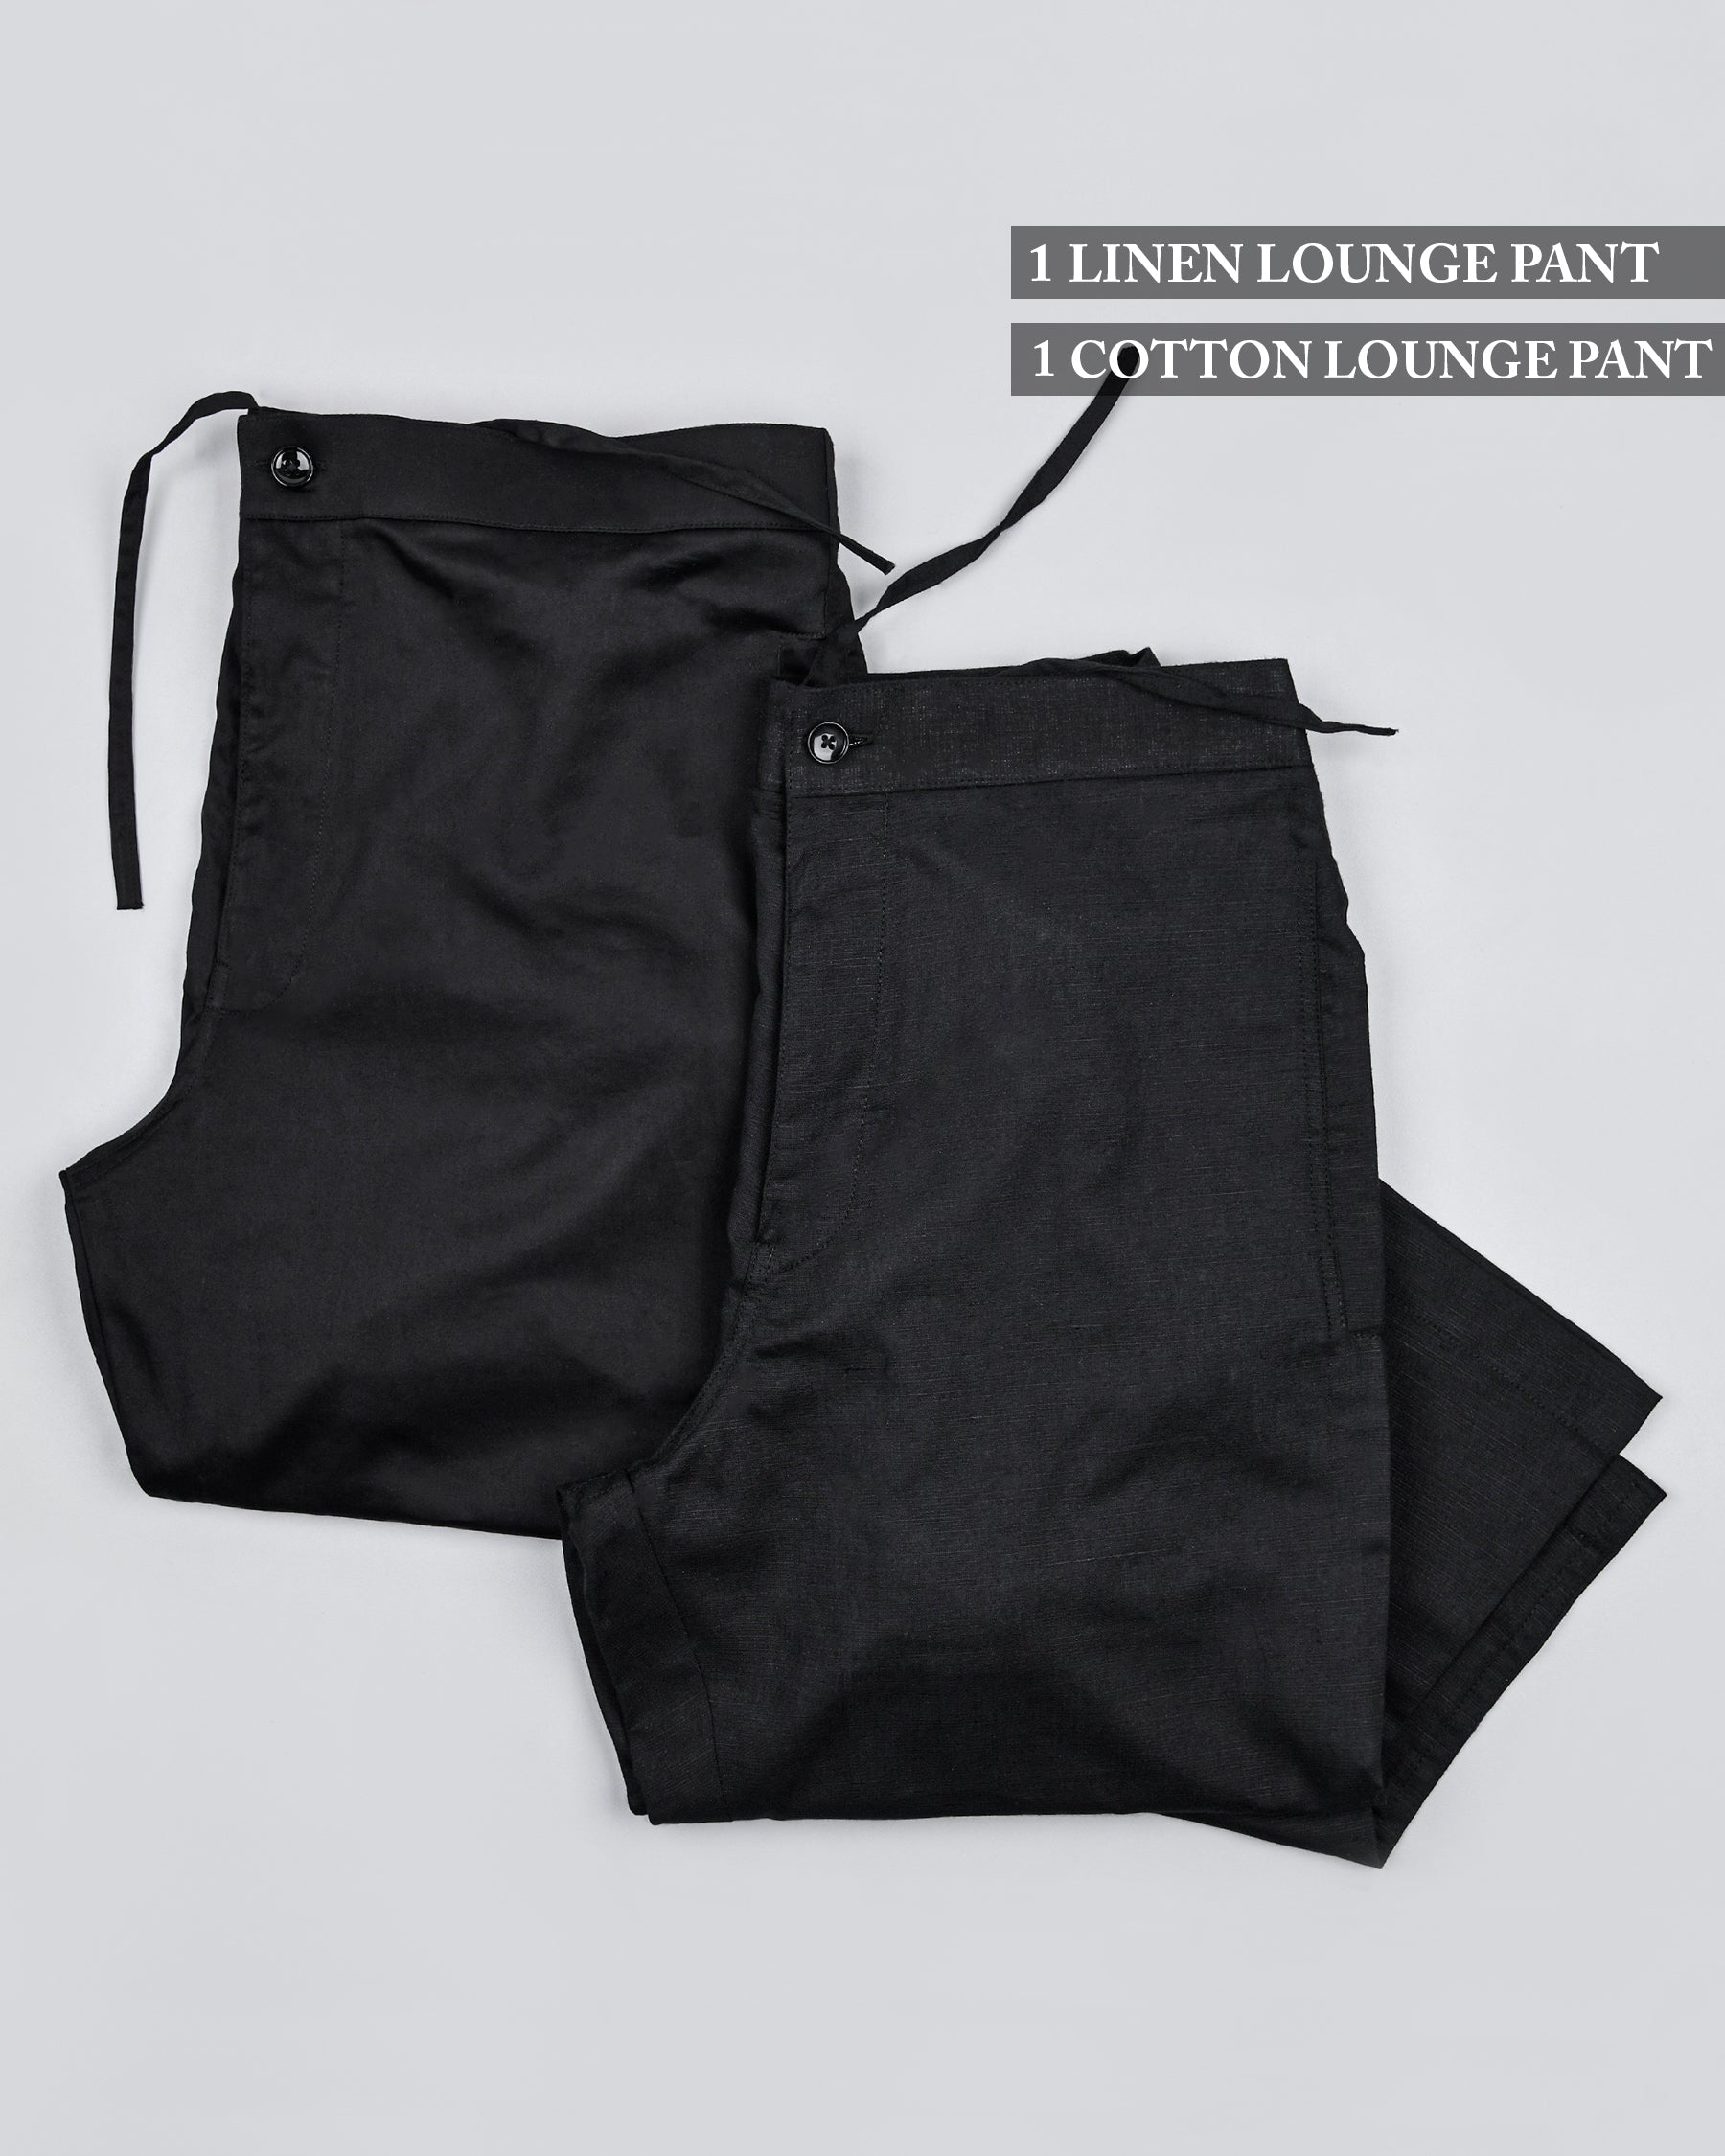 One Black Linen and One Black Cotton Lounge Pants LP017-36, LP017-28, LP017-42, LP017-30, LP017-38, LP017-34, LP017-44, LP017-40, LP017-32